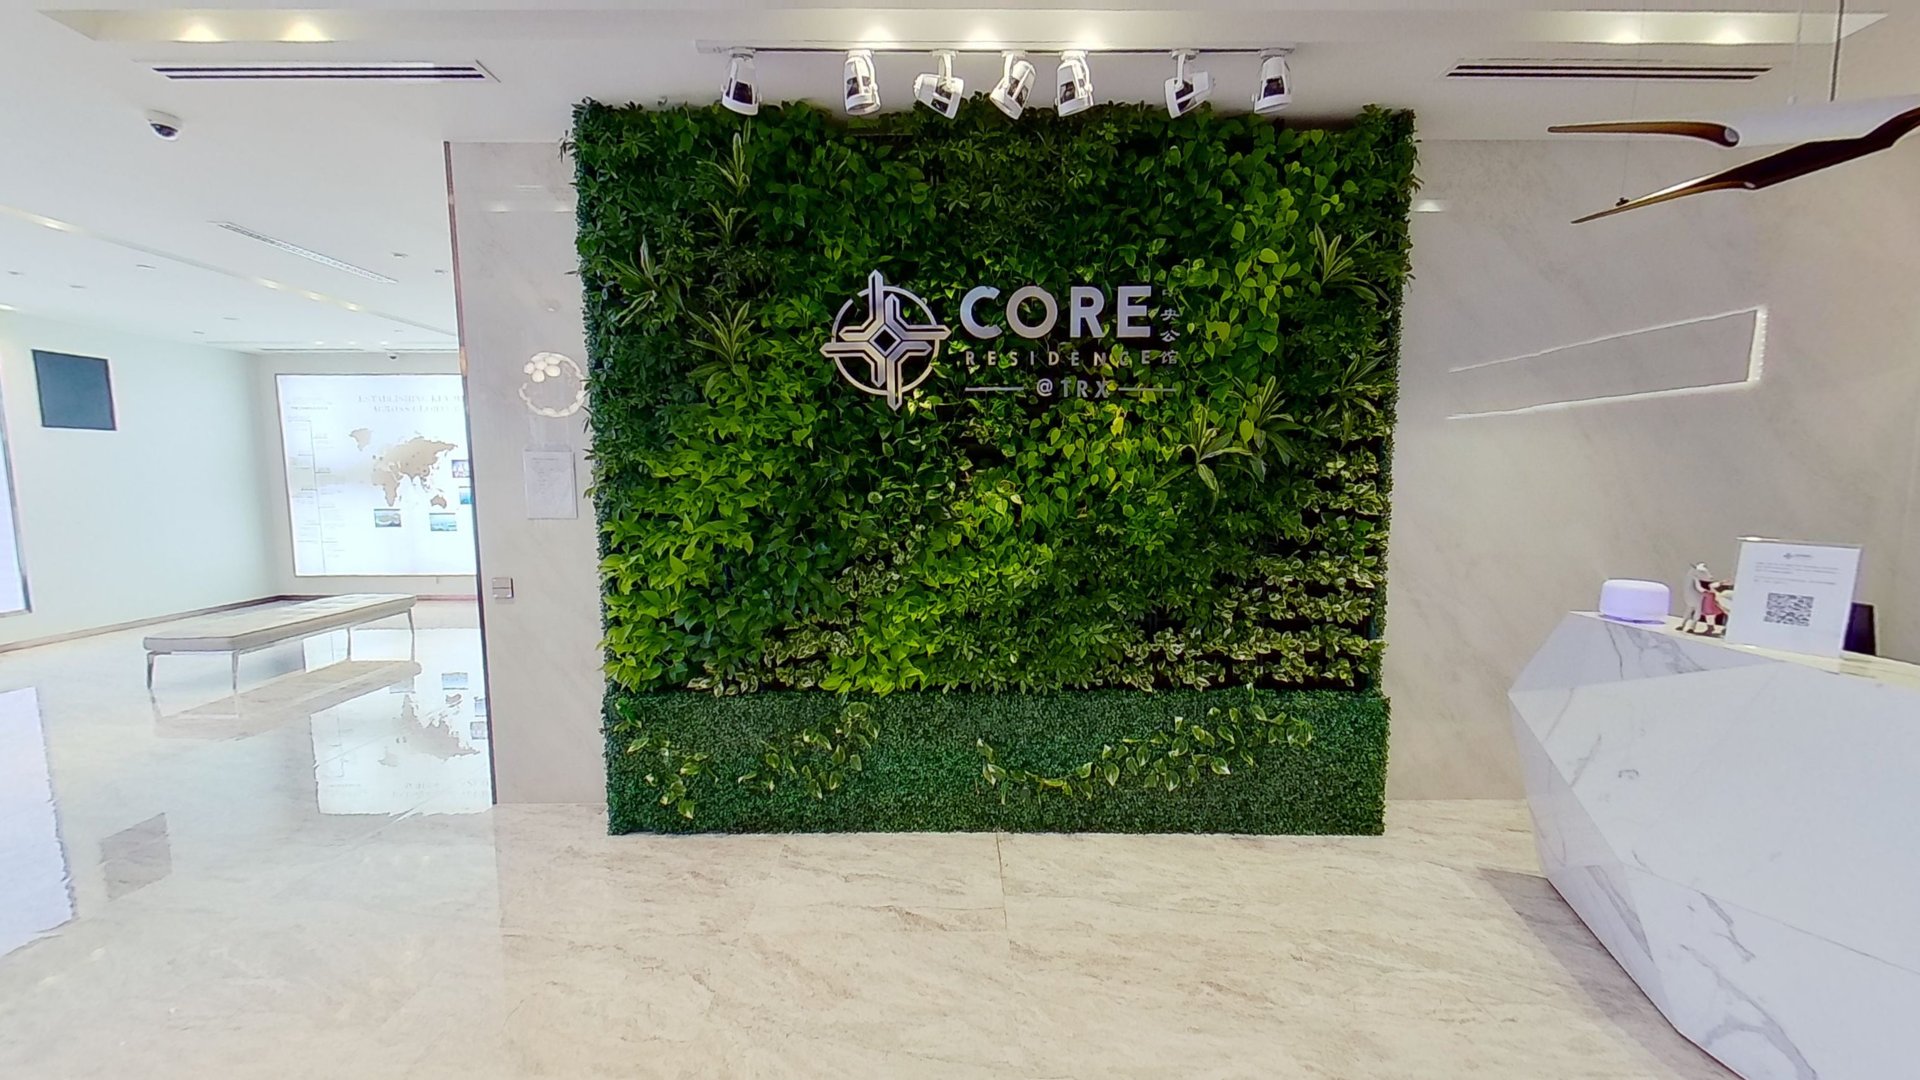 Core Residence